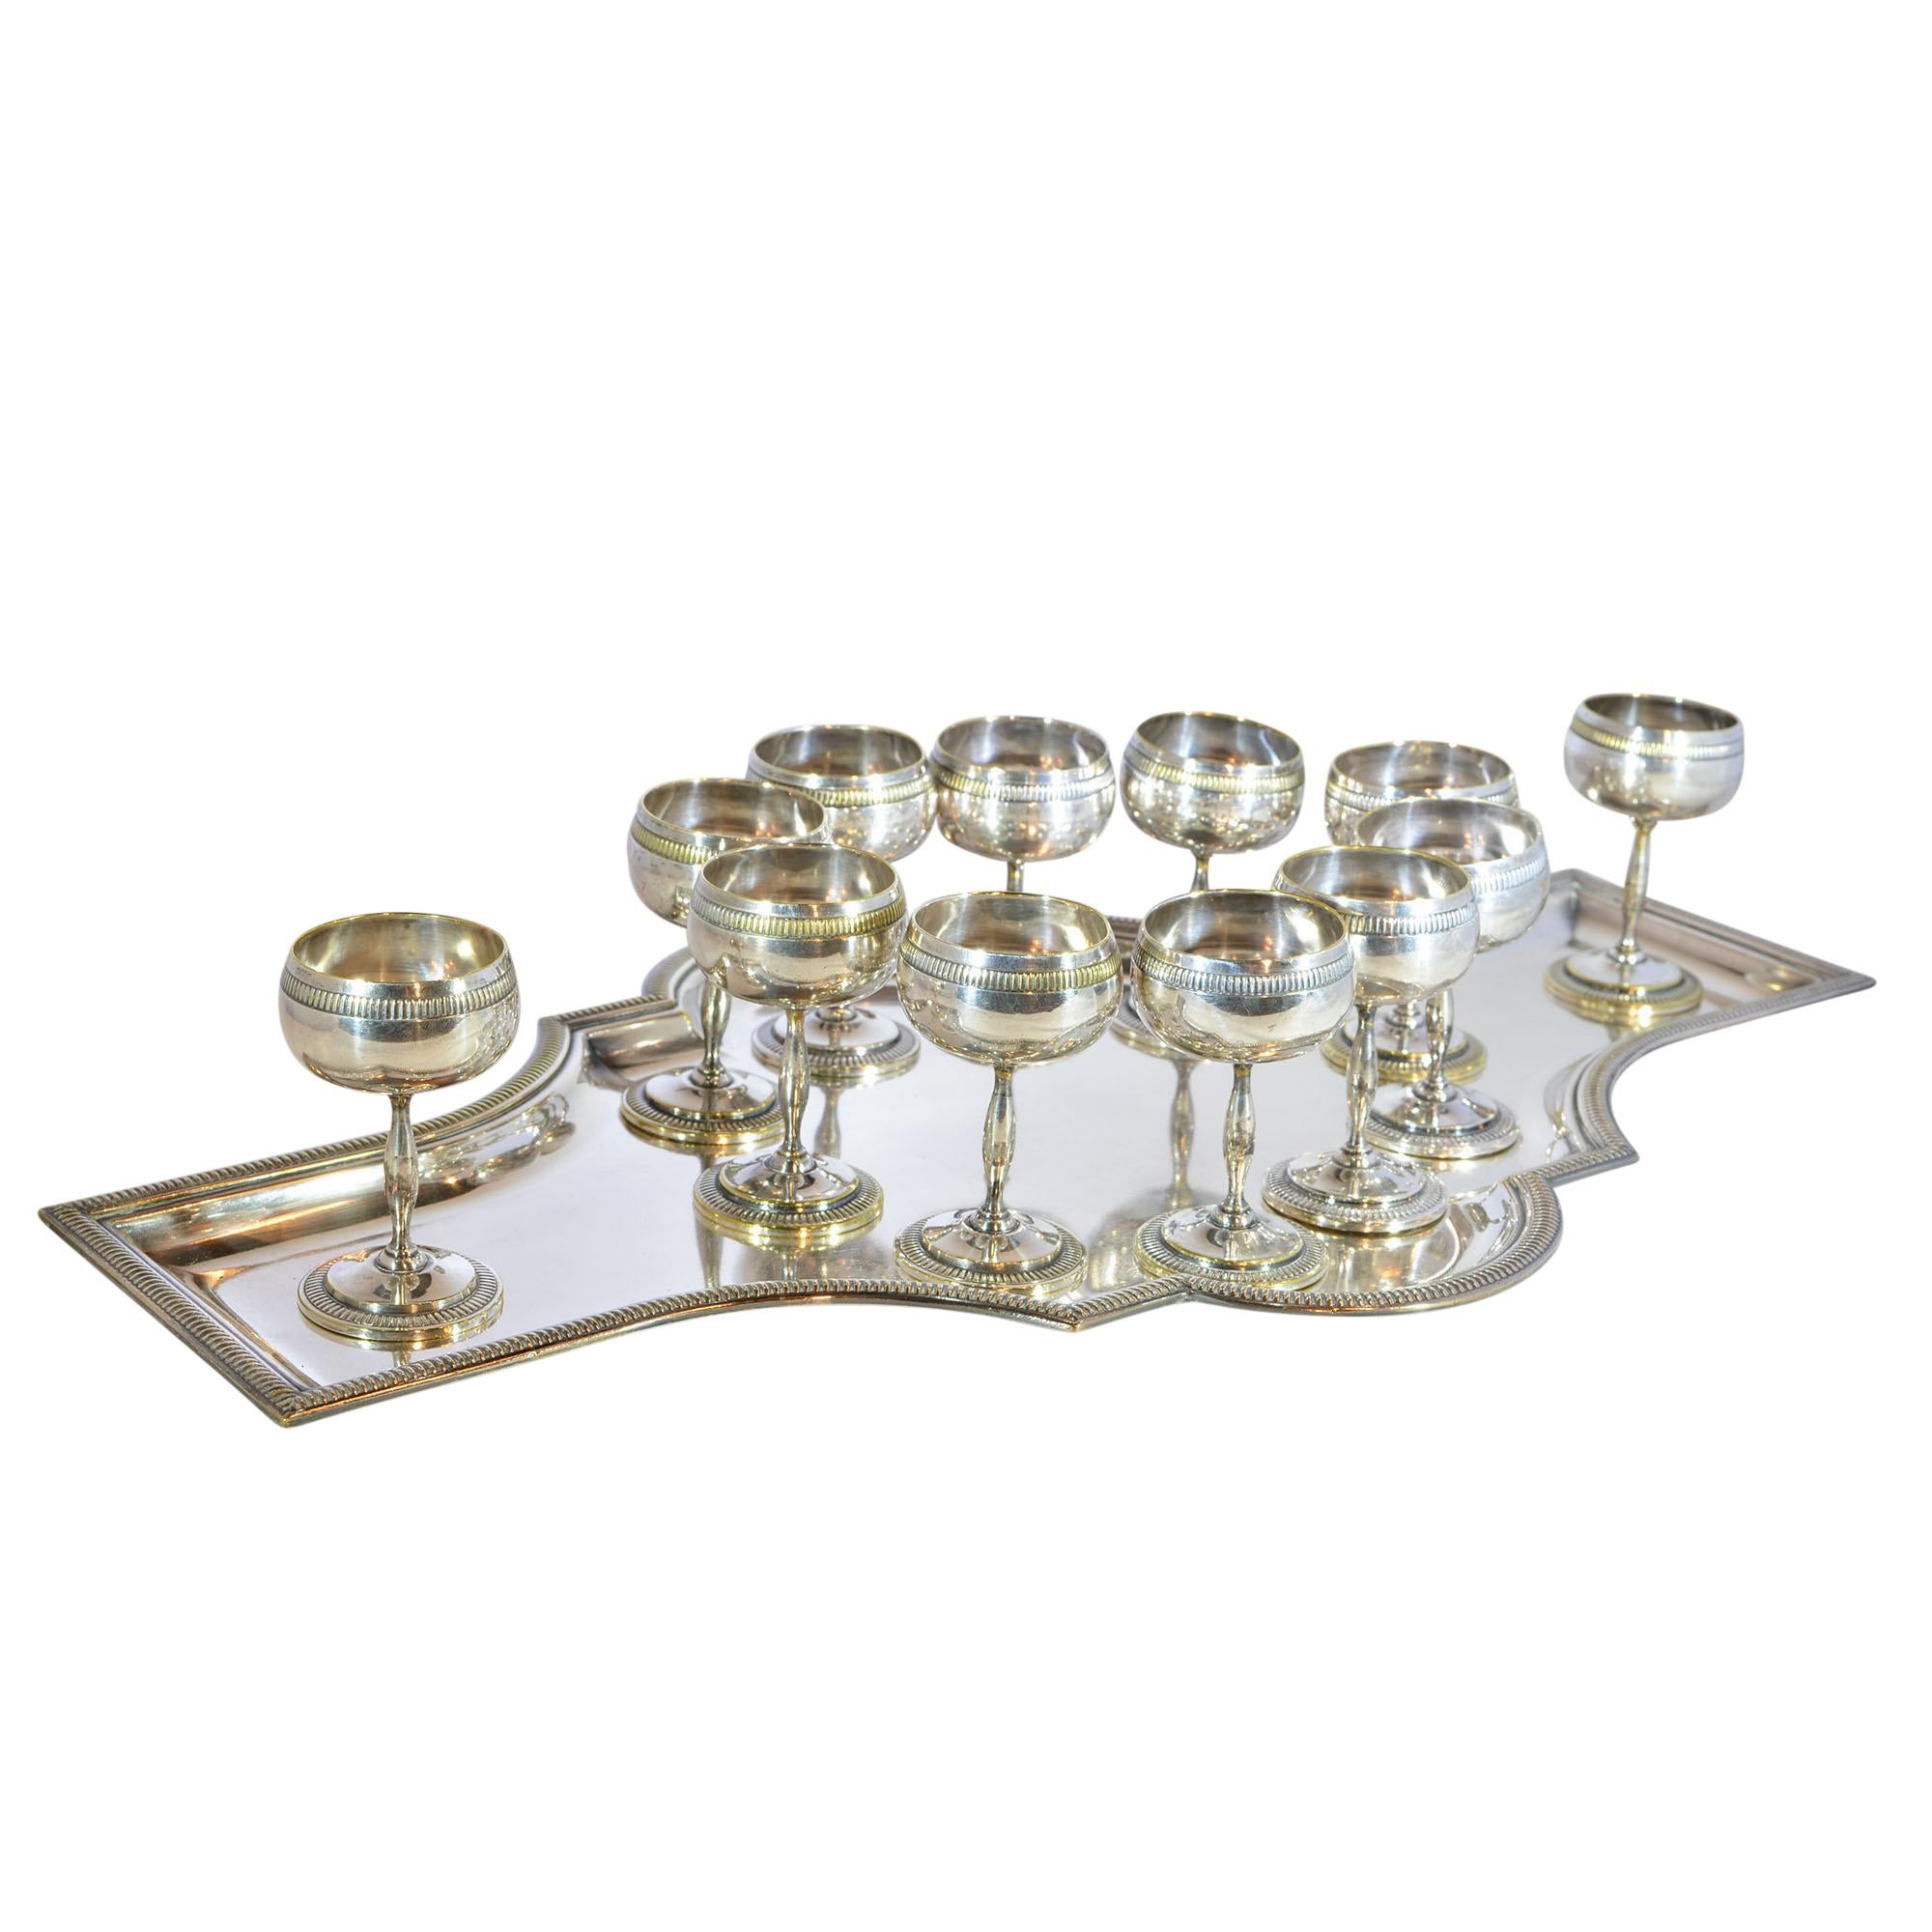 Silver Plate Shot Glass Set with Tray